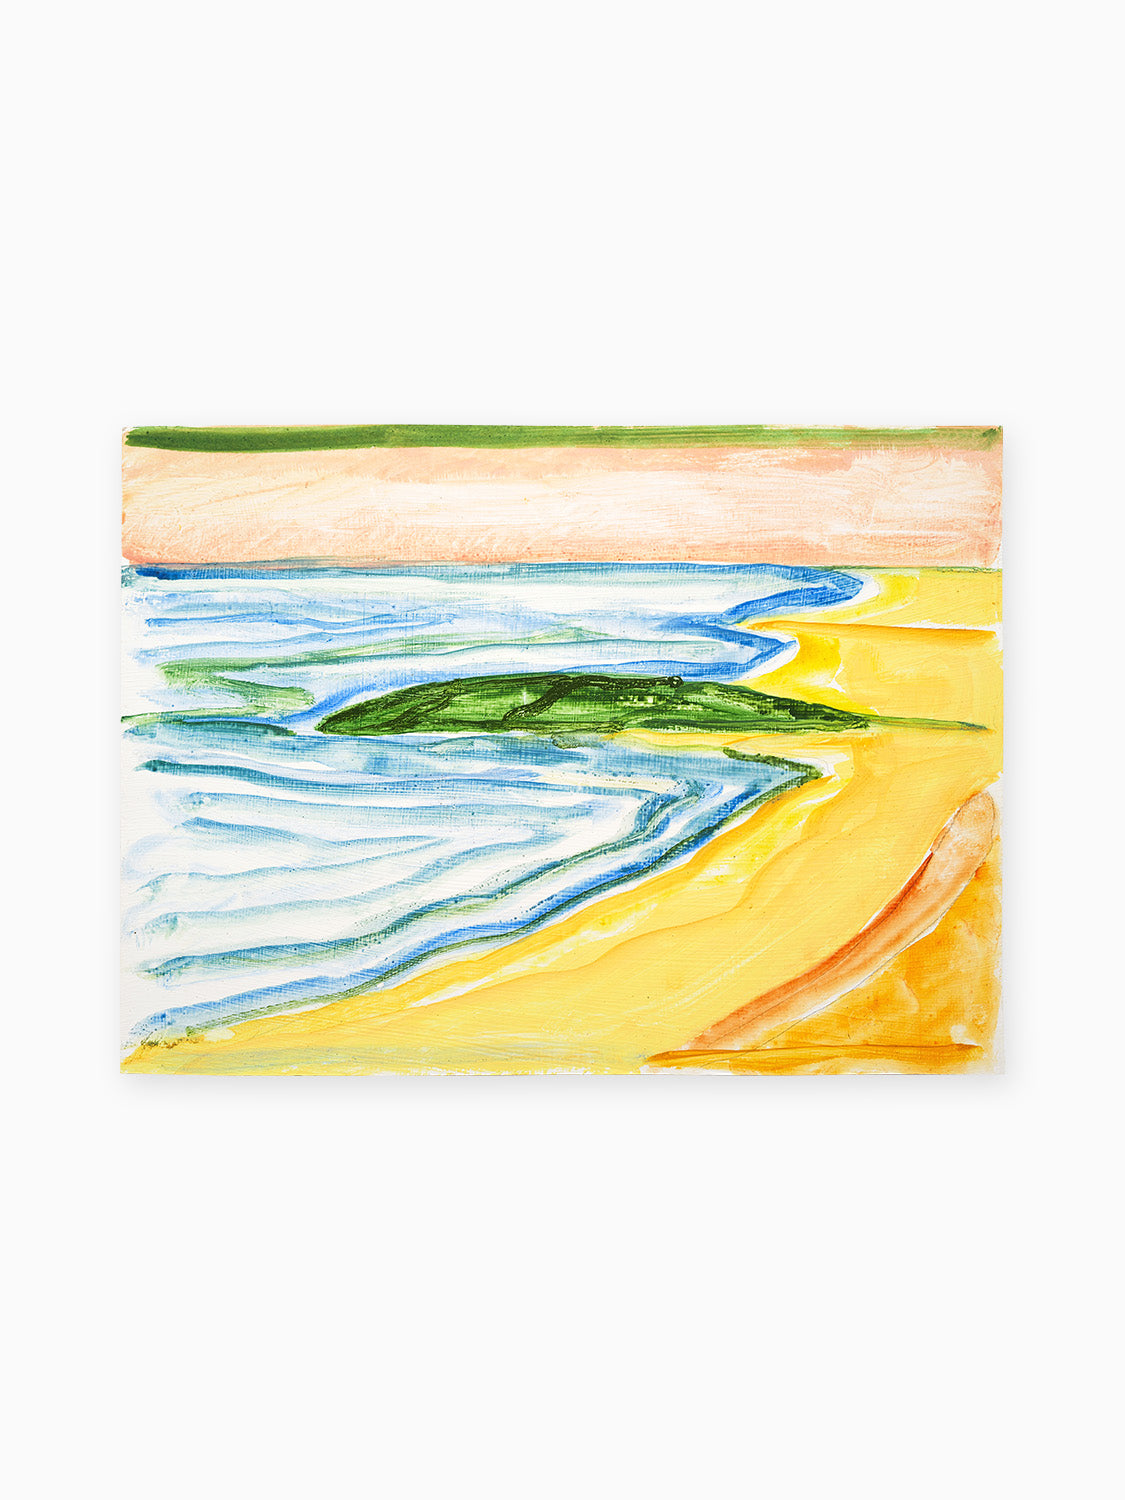 Rockaway Beach at 67th Street, NYC (in Peach and Citron)